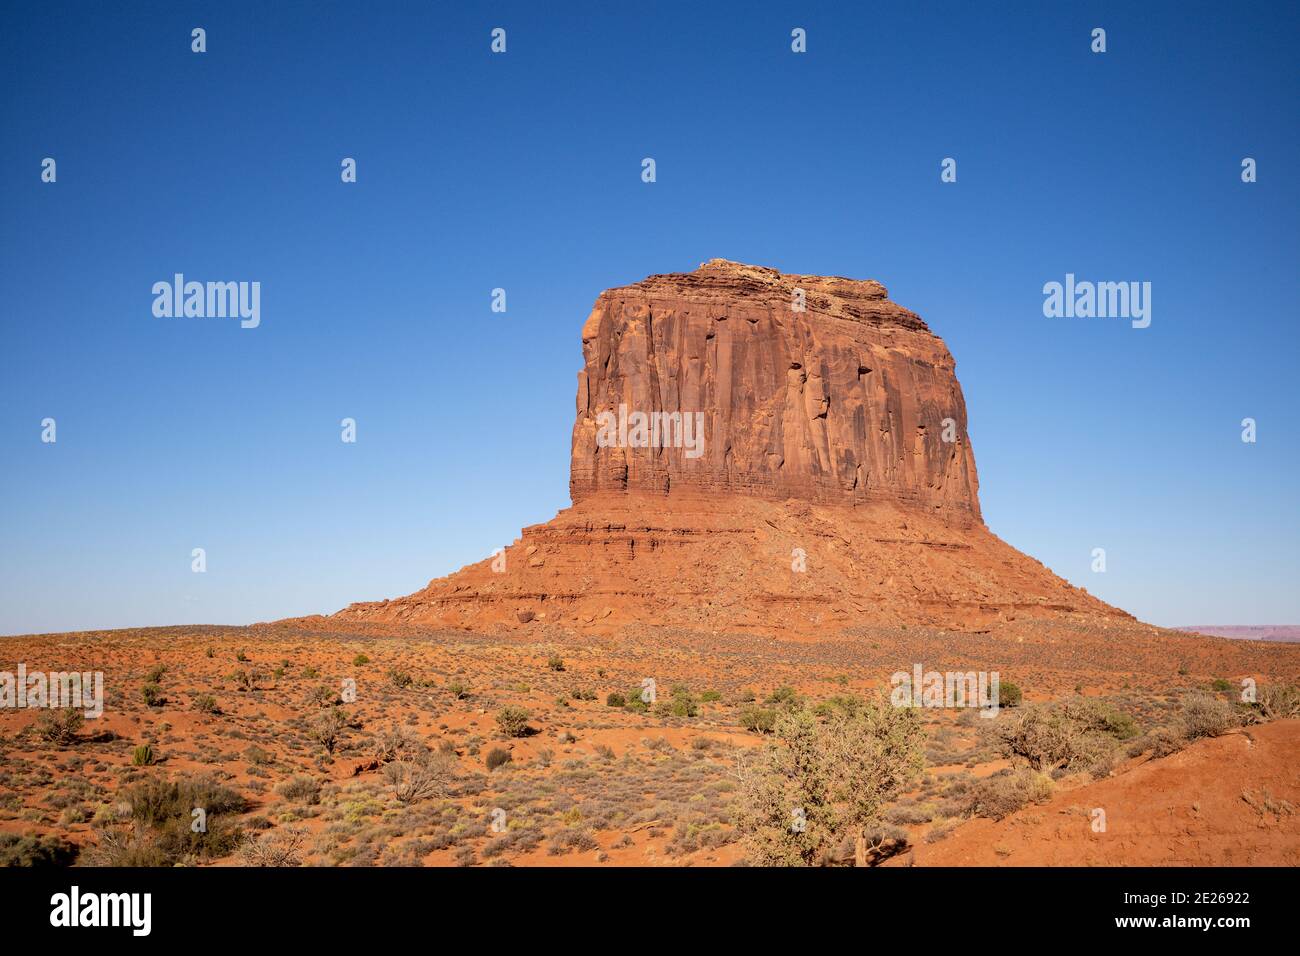 The Merrick Butte rock formation in Monument Valley Navajo Tribal Park which straddles the Arizona and Utah state line, USA Stock Photo